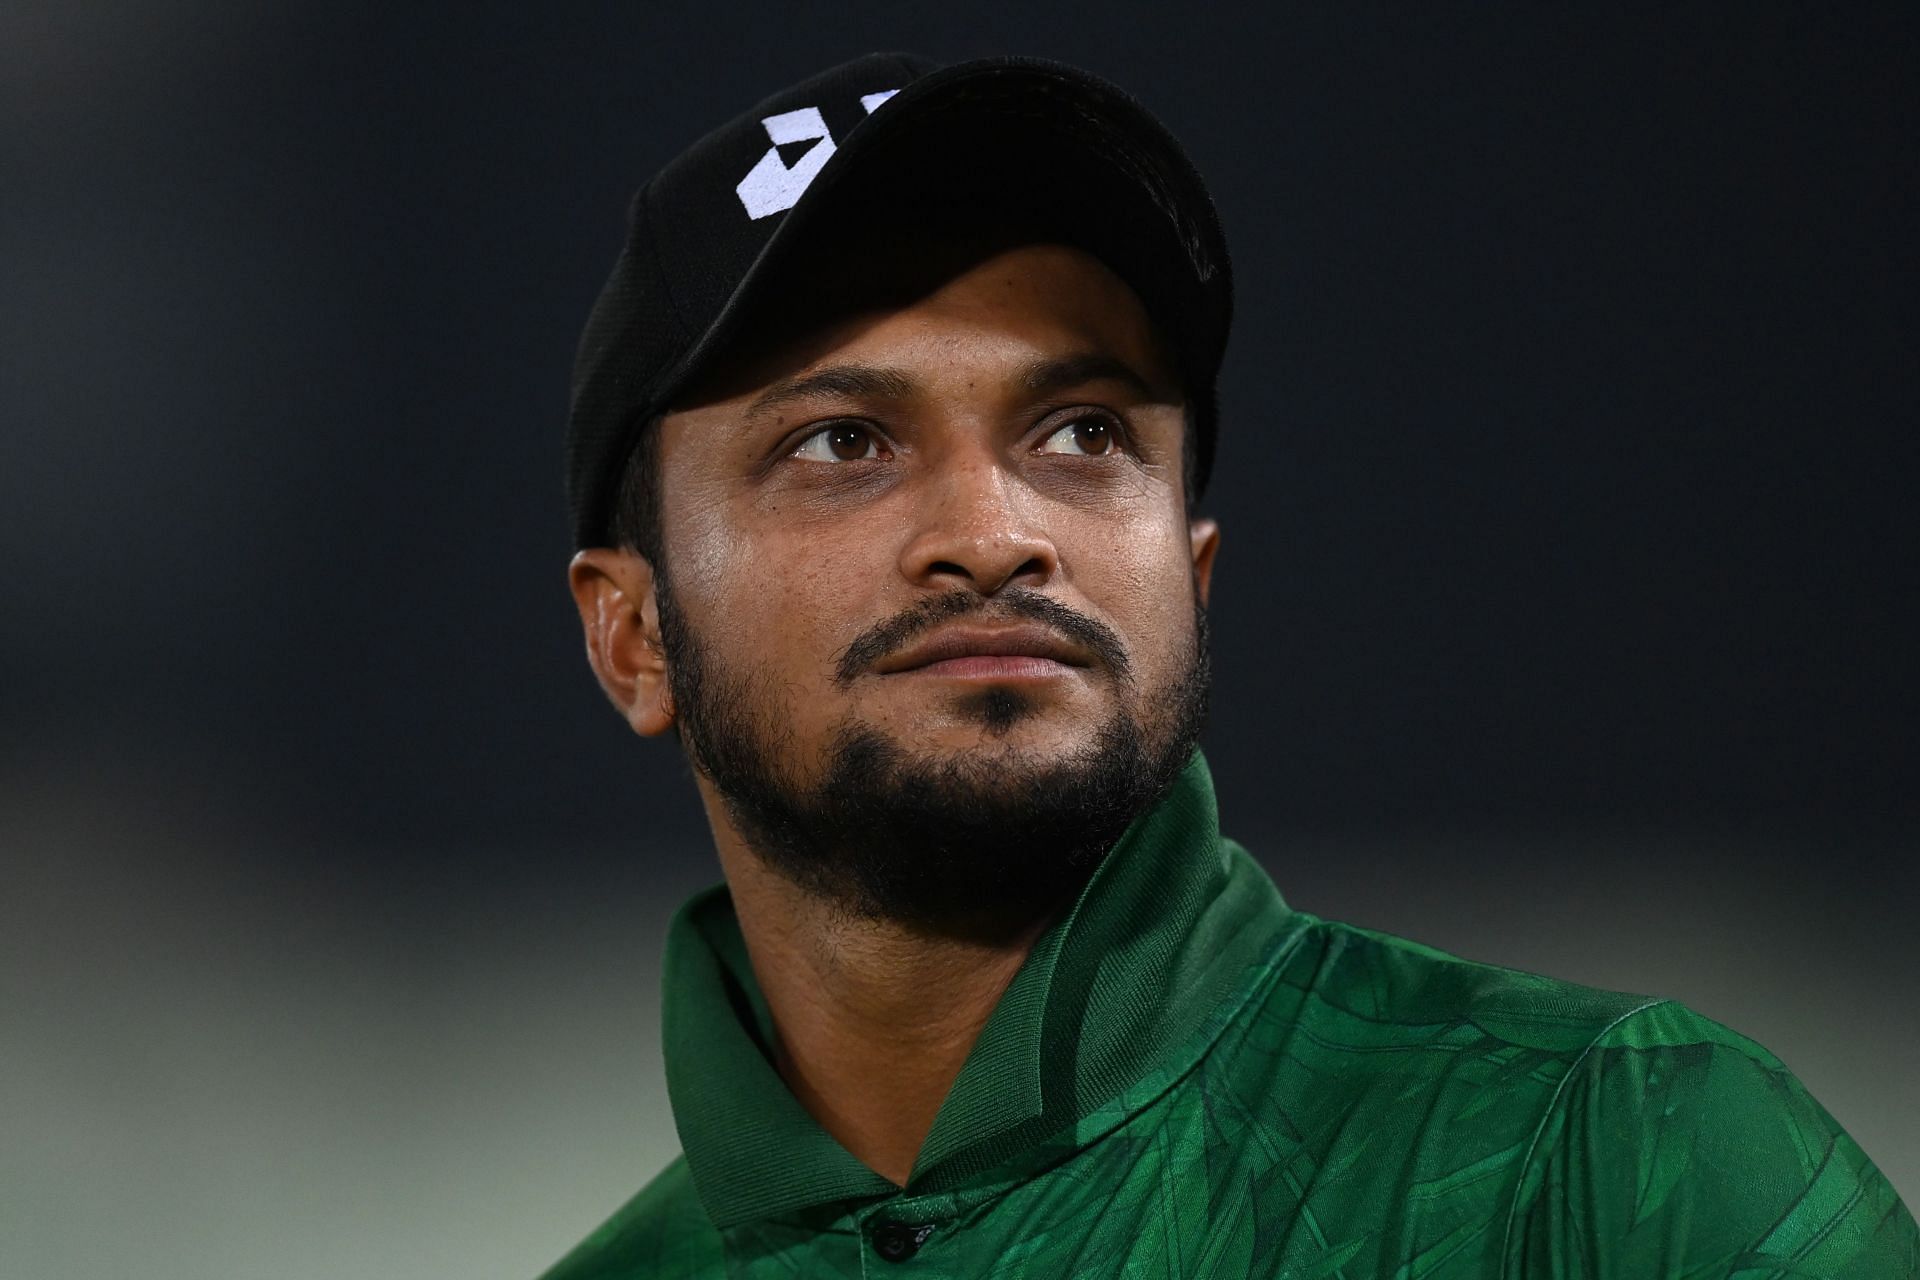 Shakib received sanctions from the ICC.